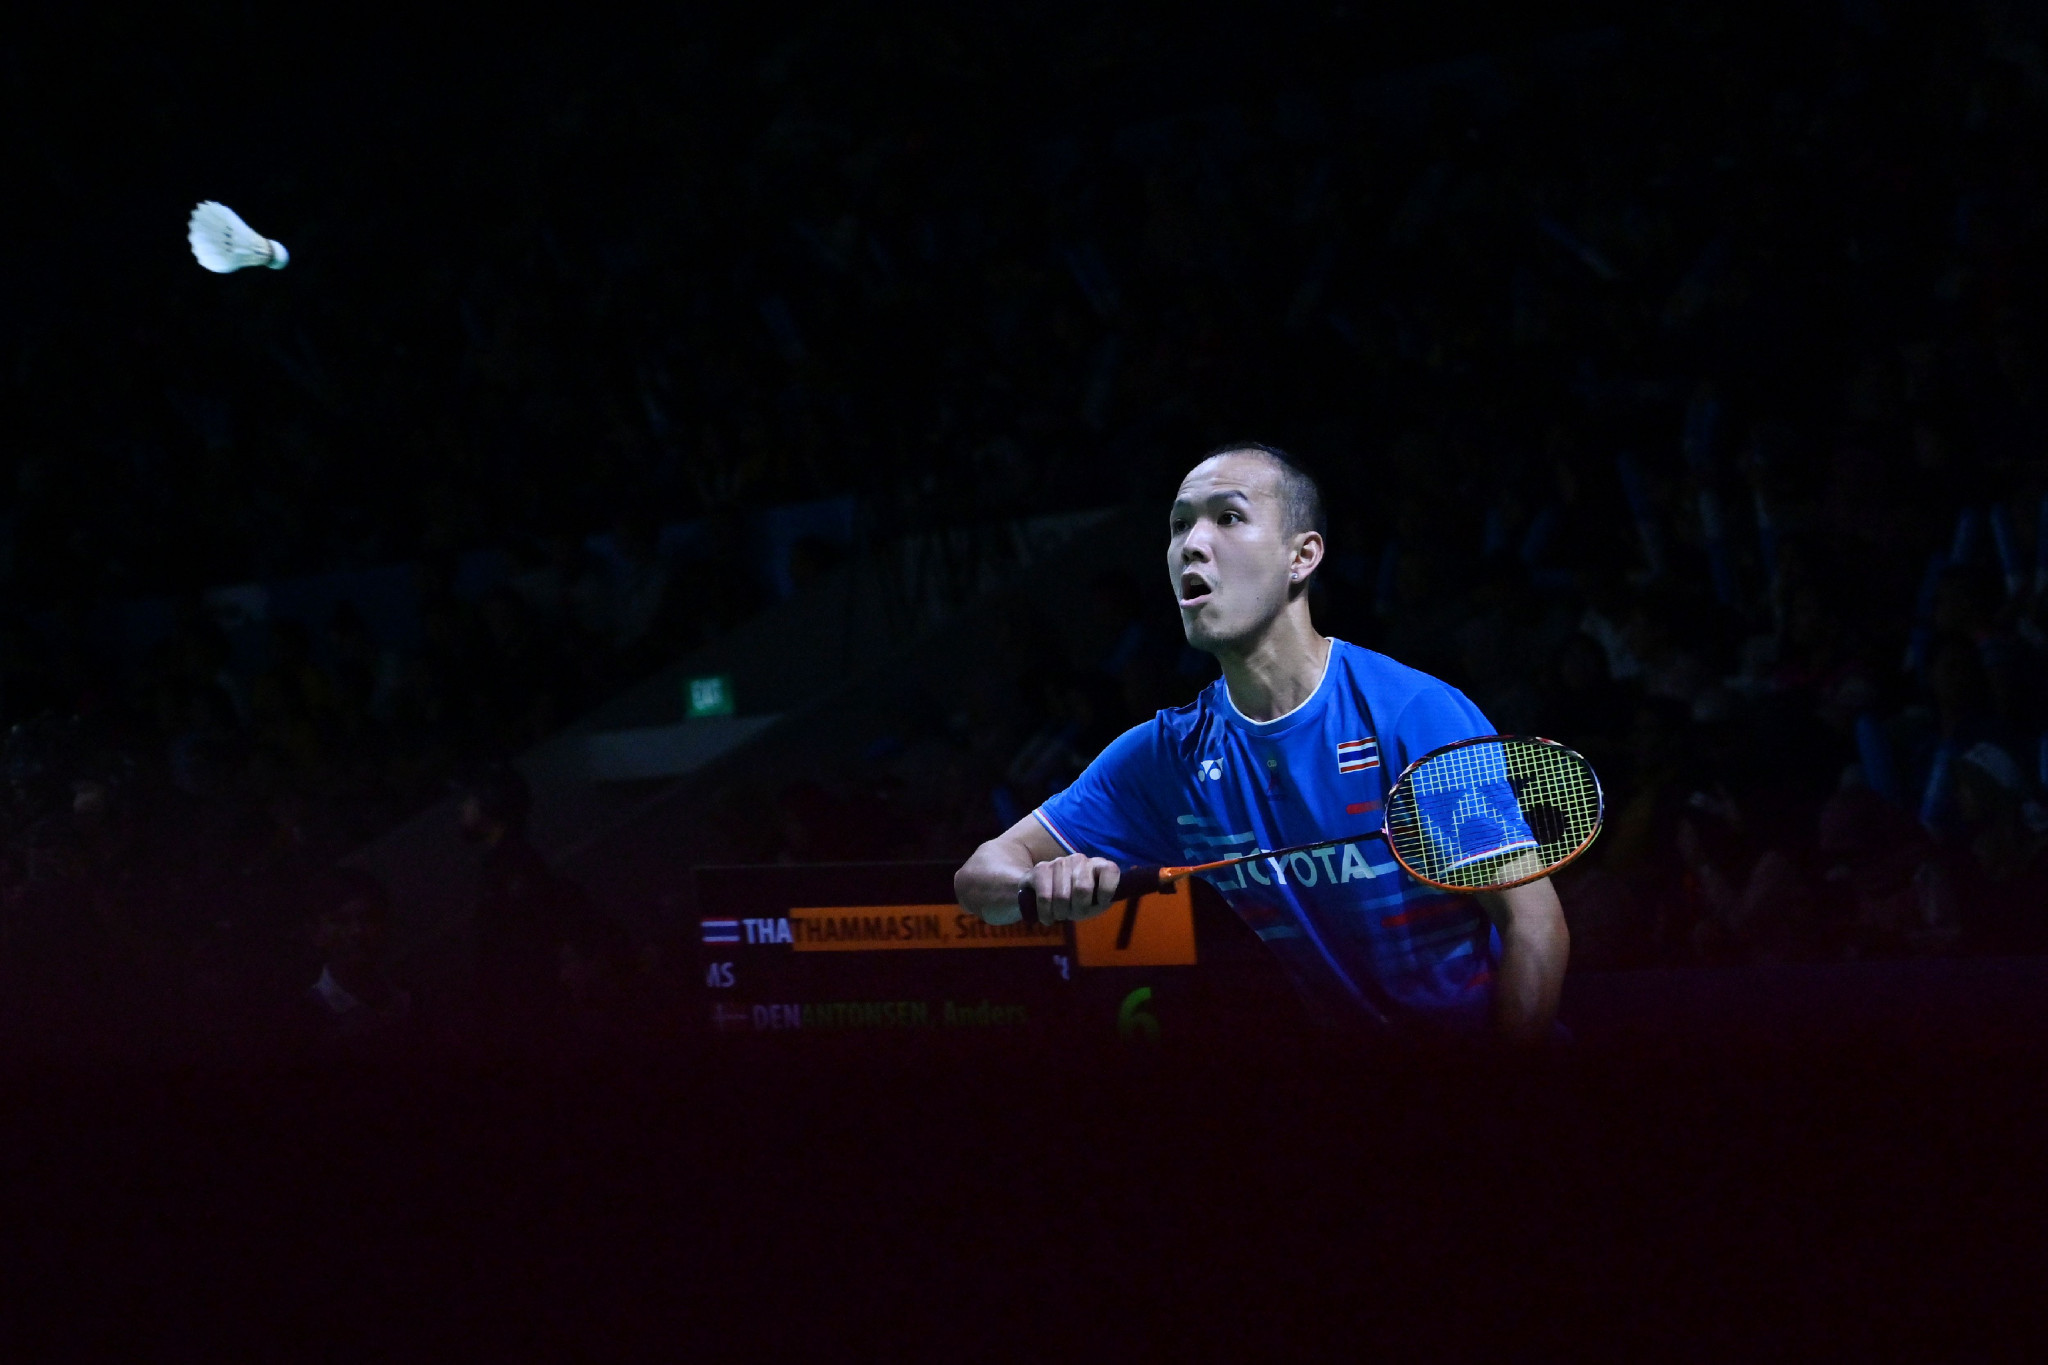 Thailand's Sitthikom Thammasin claimed the men's singles title at the BWF Macau Open ©Getty Images